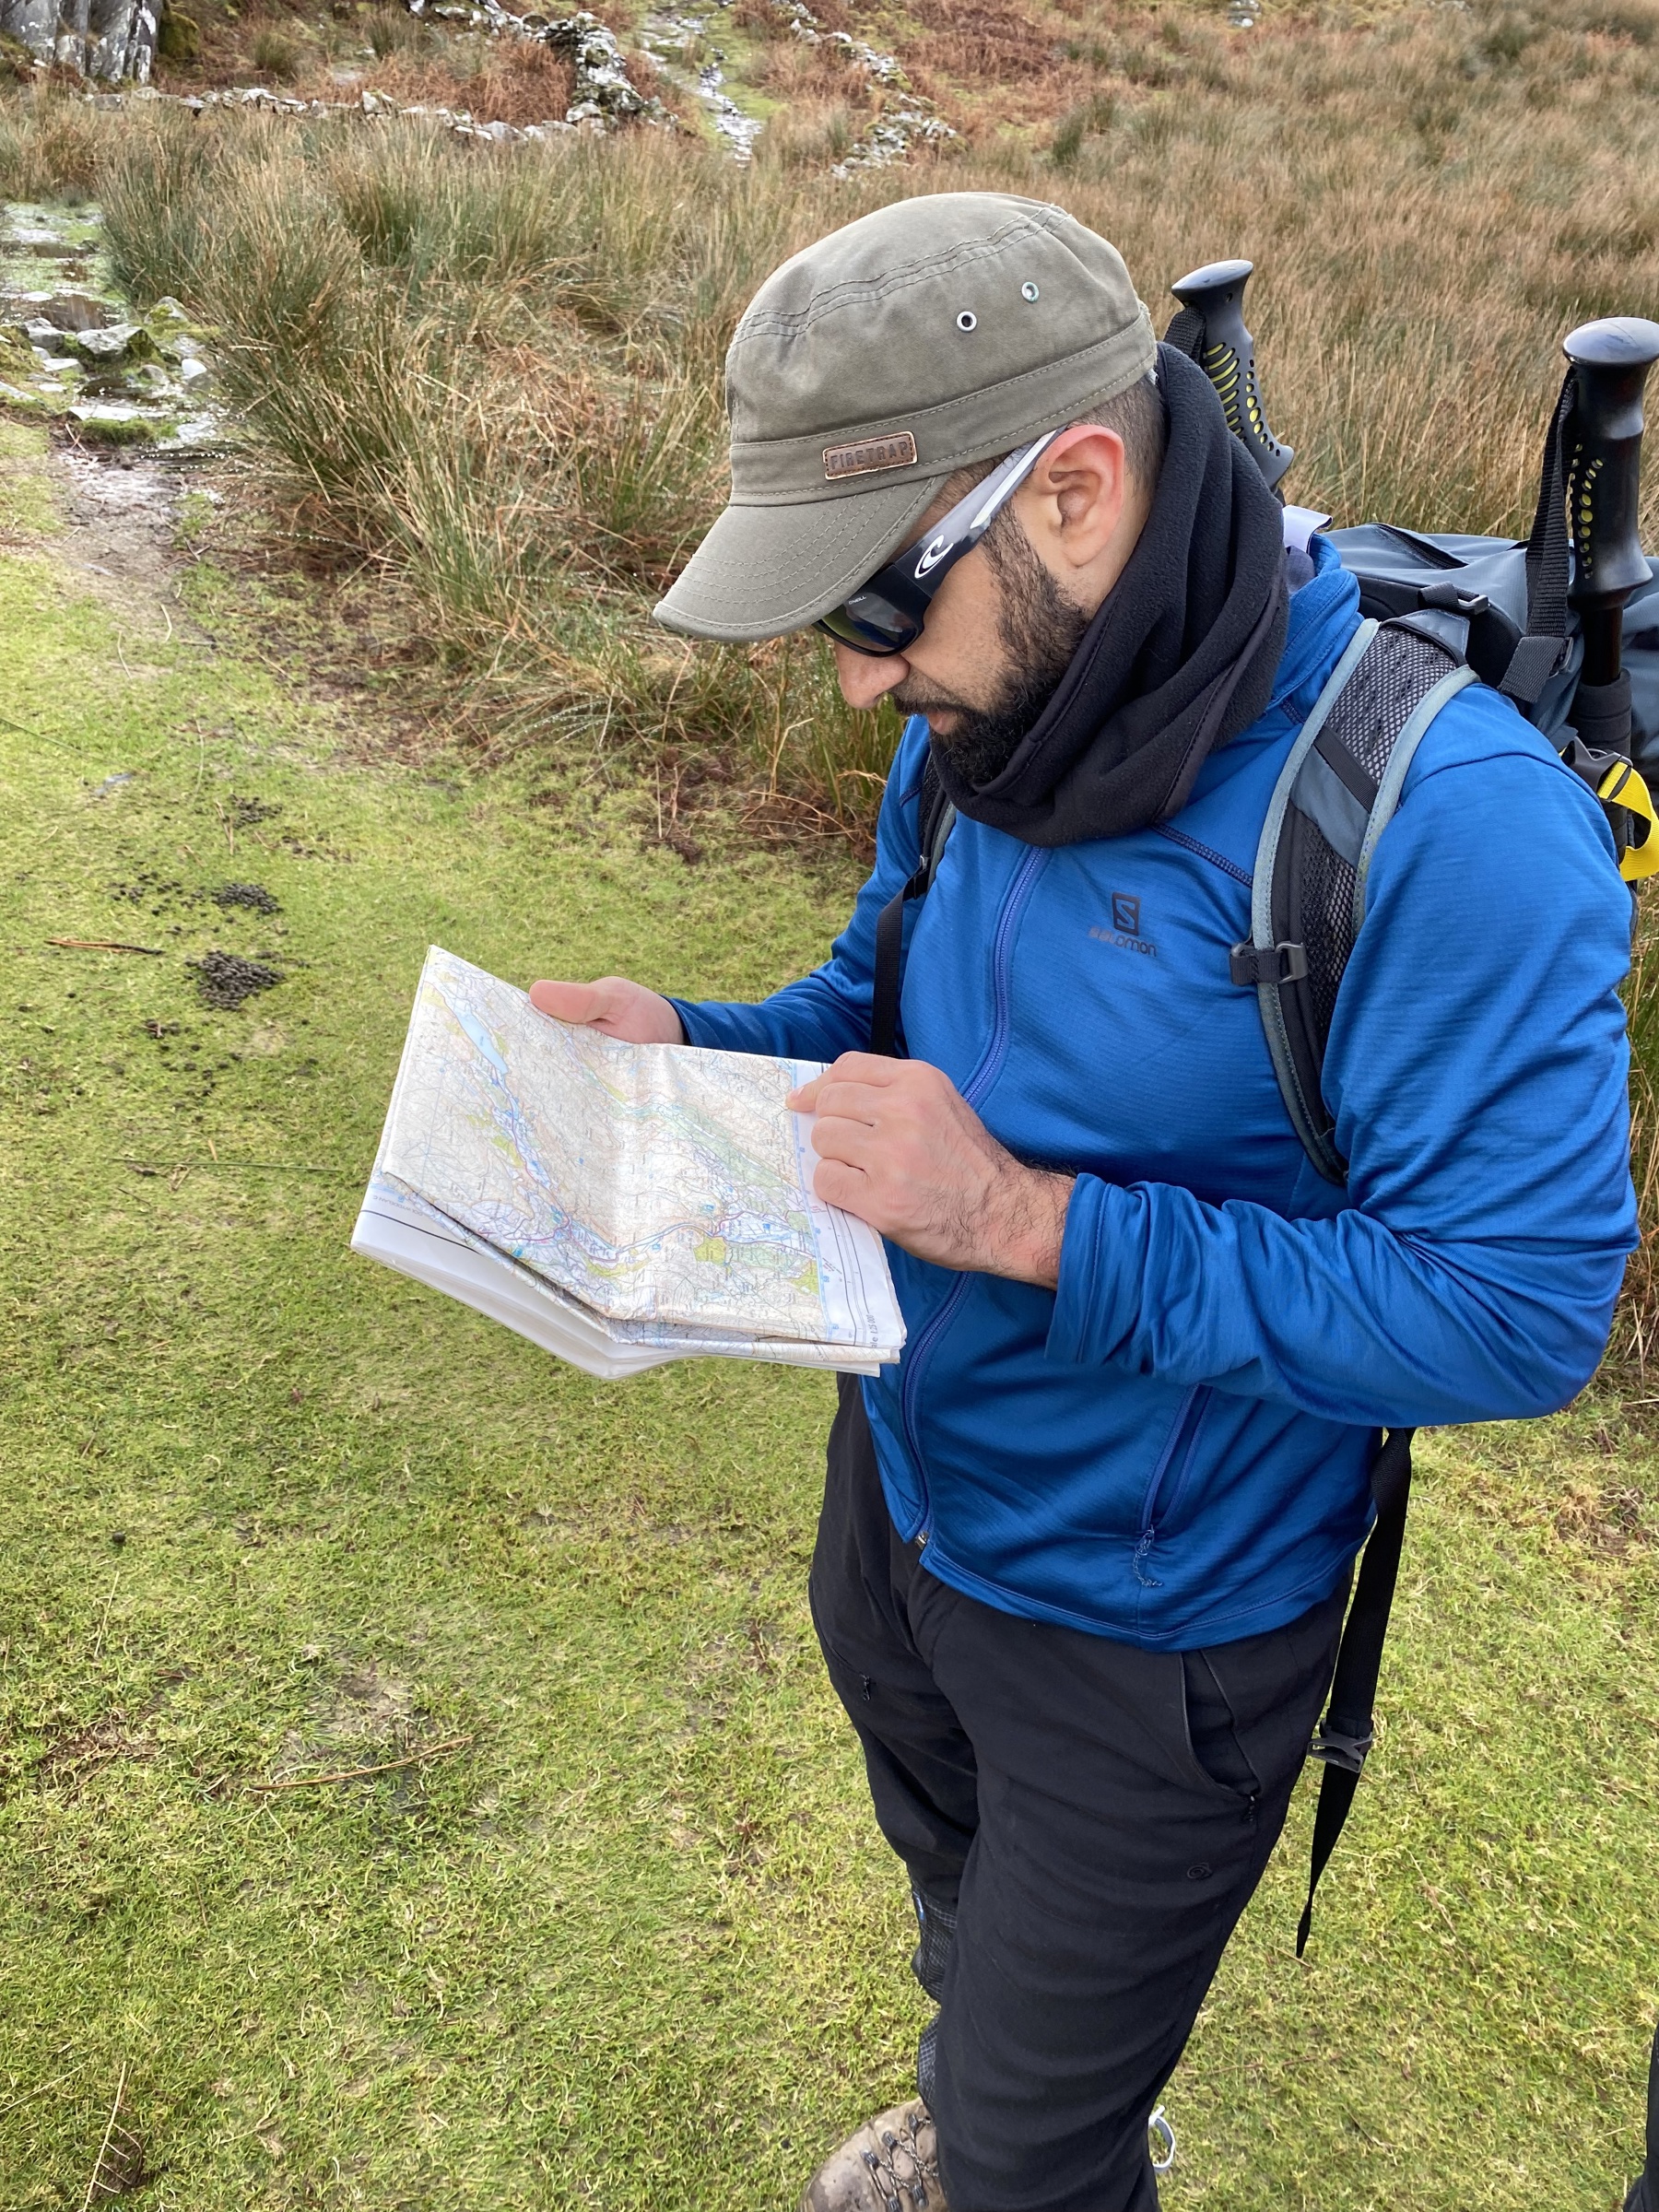 Mahroof is out in a field, with some marshland behind him. He’s looking at the map, while wearing his walking gear, boots, hat and sunglasses. He’s wearing a blue waterproof and his walking poles are in his bag.